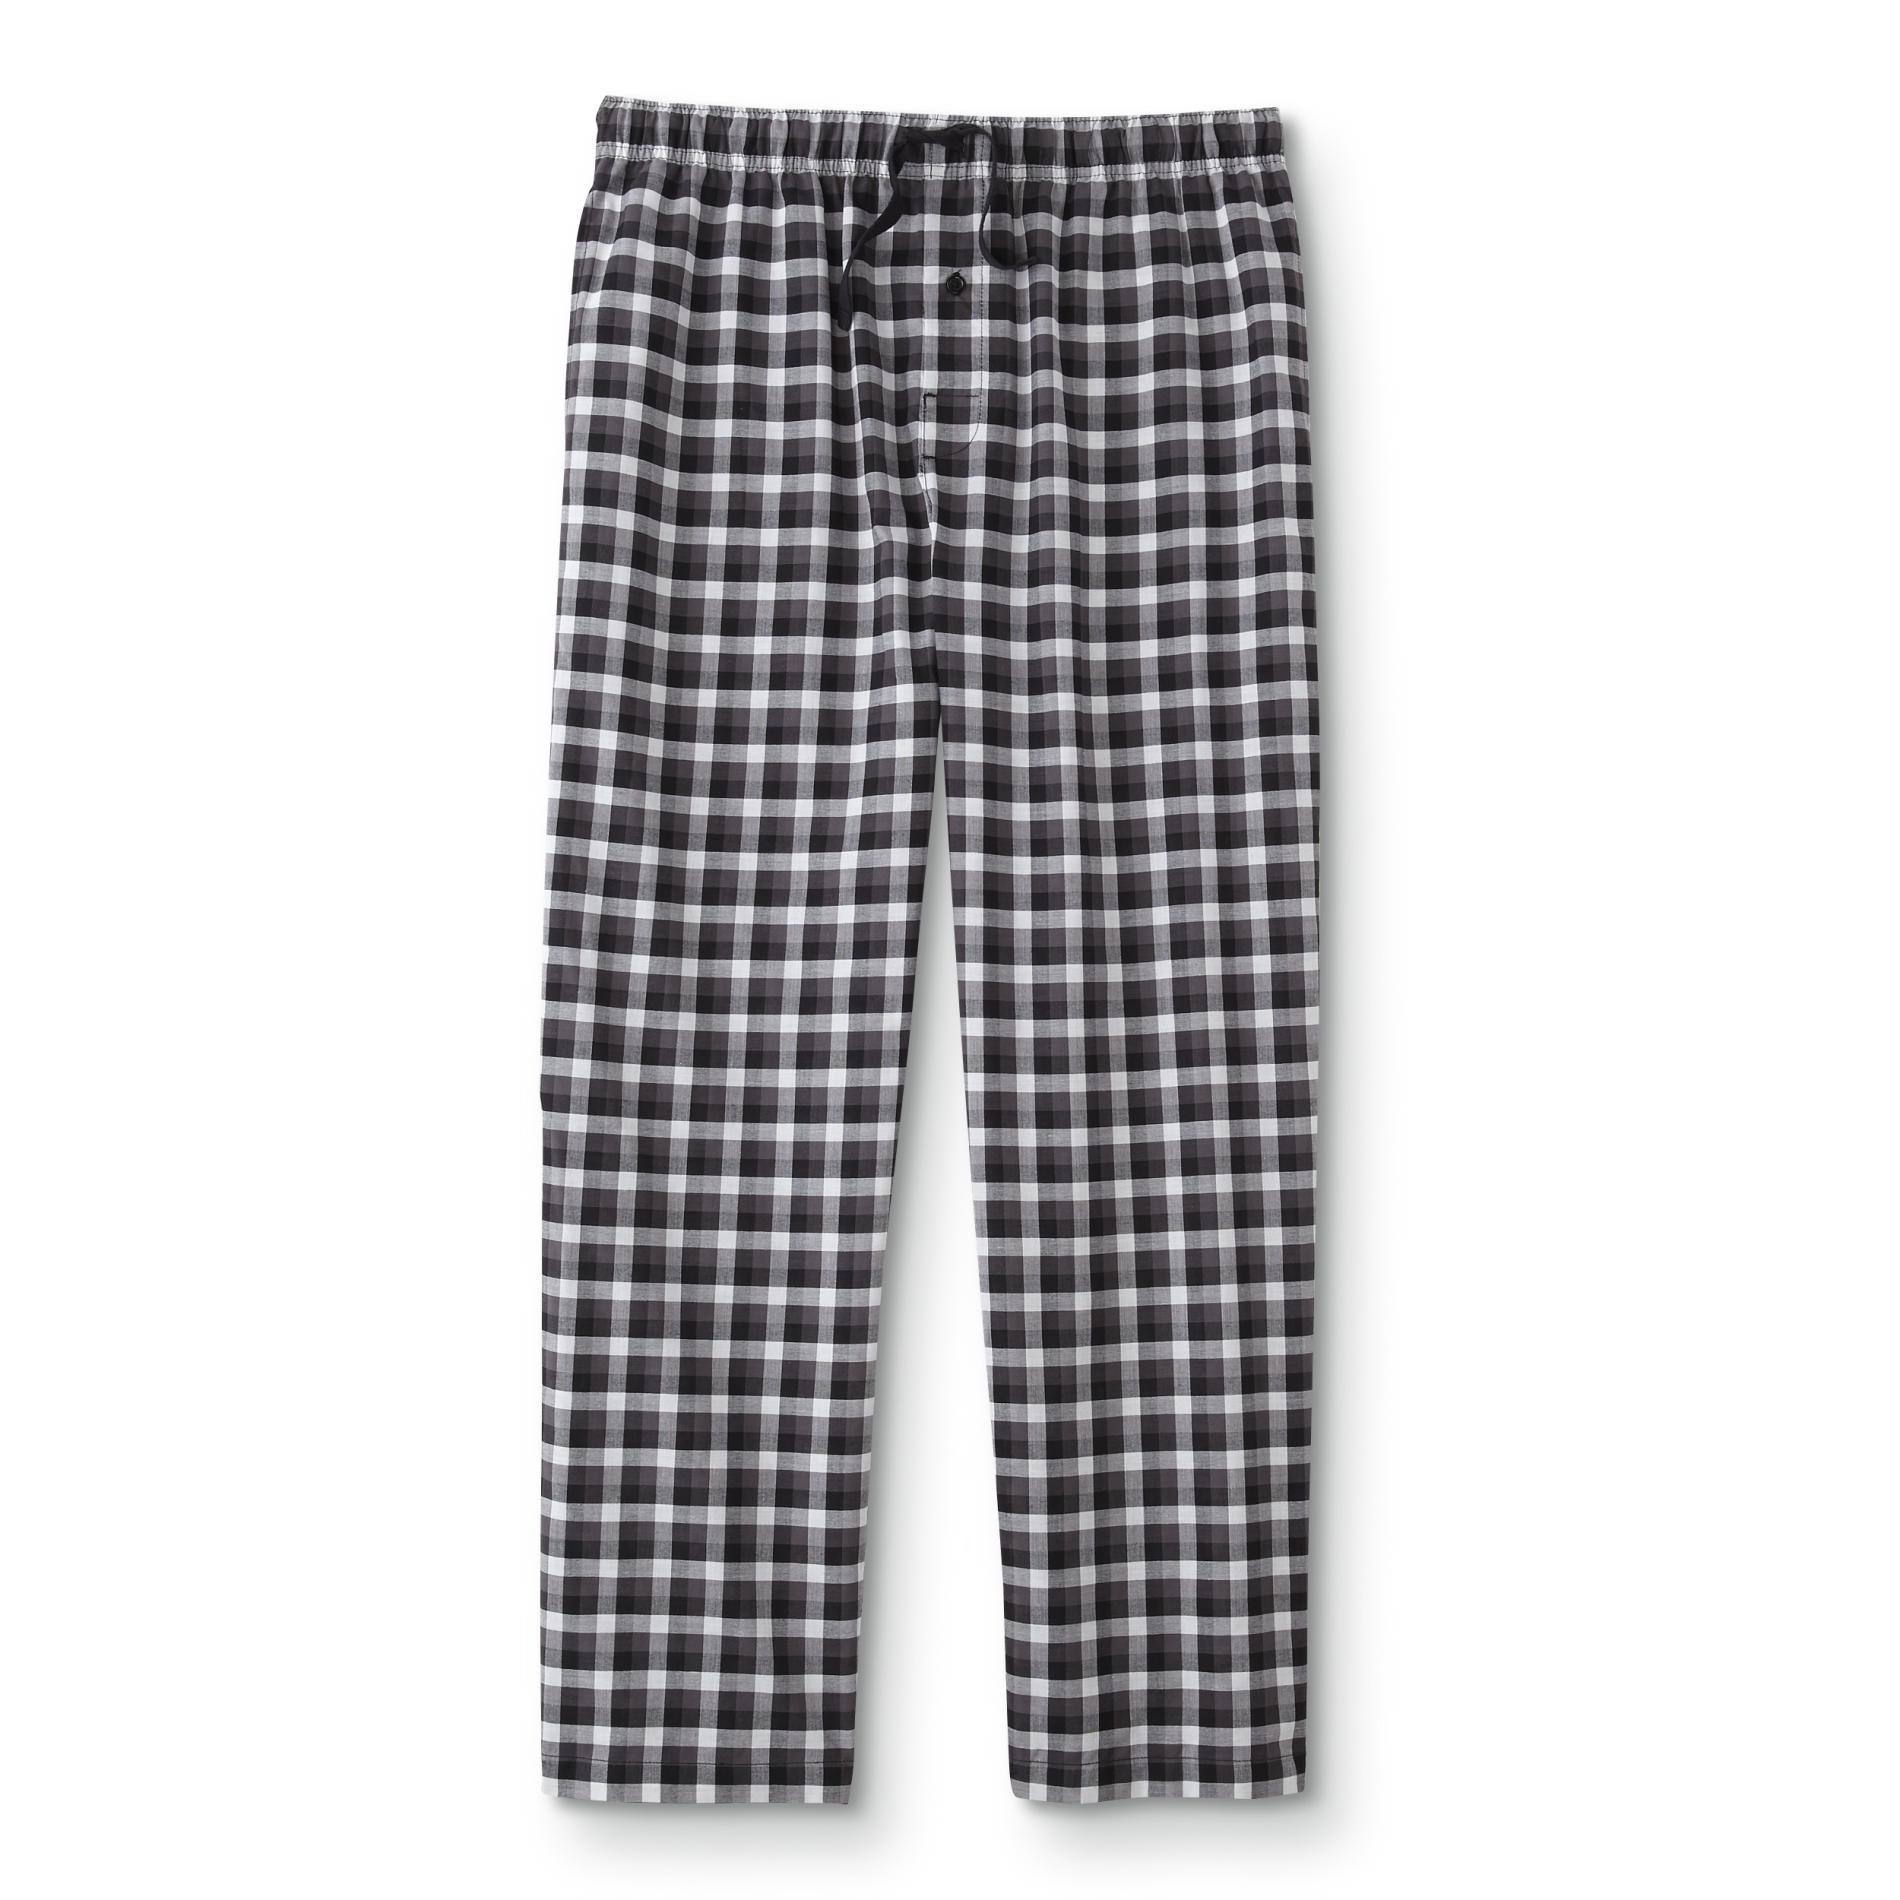 Simply Styled Men's Pajama Pants - Checkered